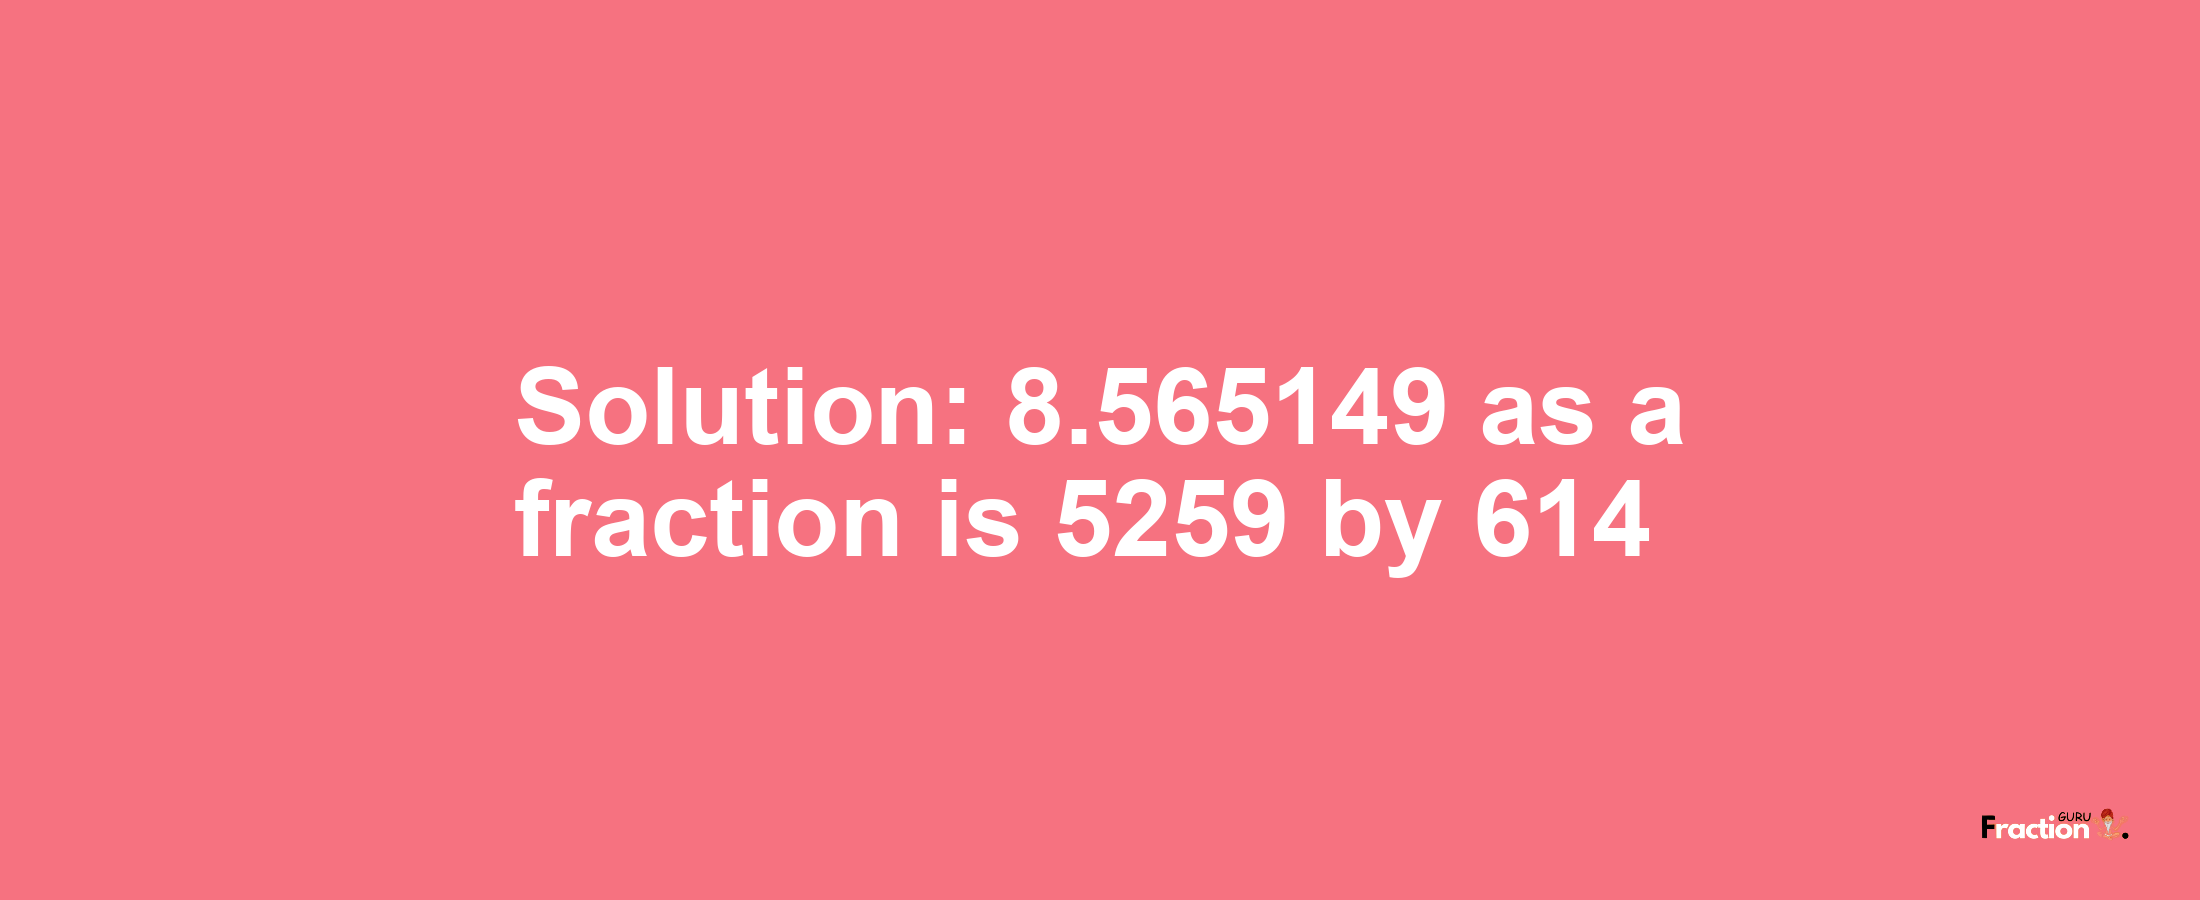 Solution:8.565149 as a fraction is 5259/614